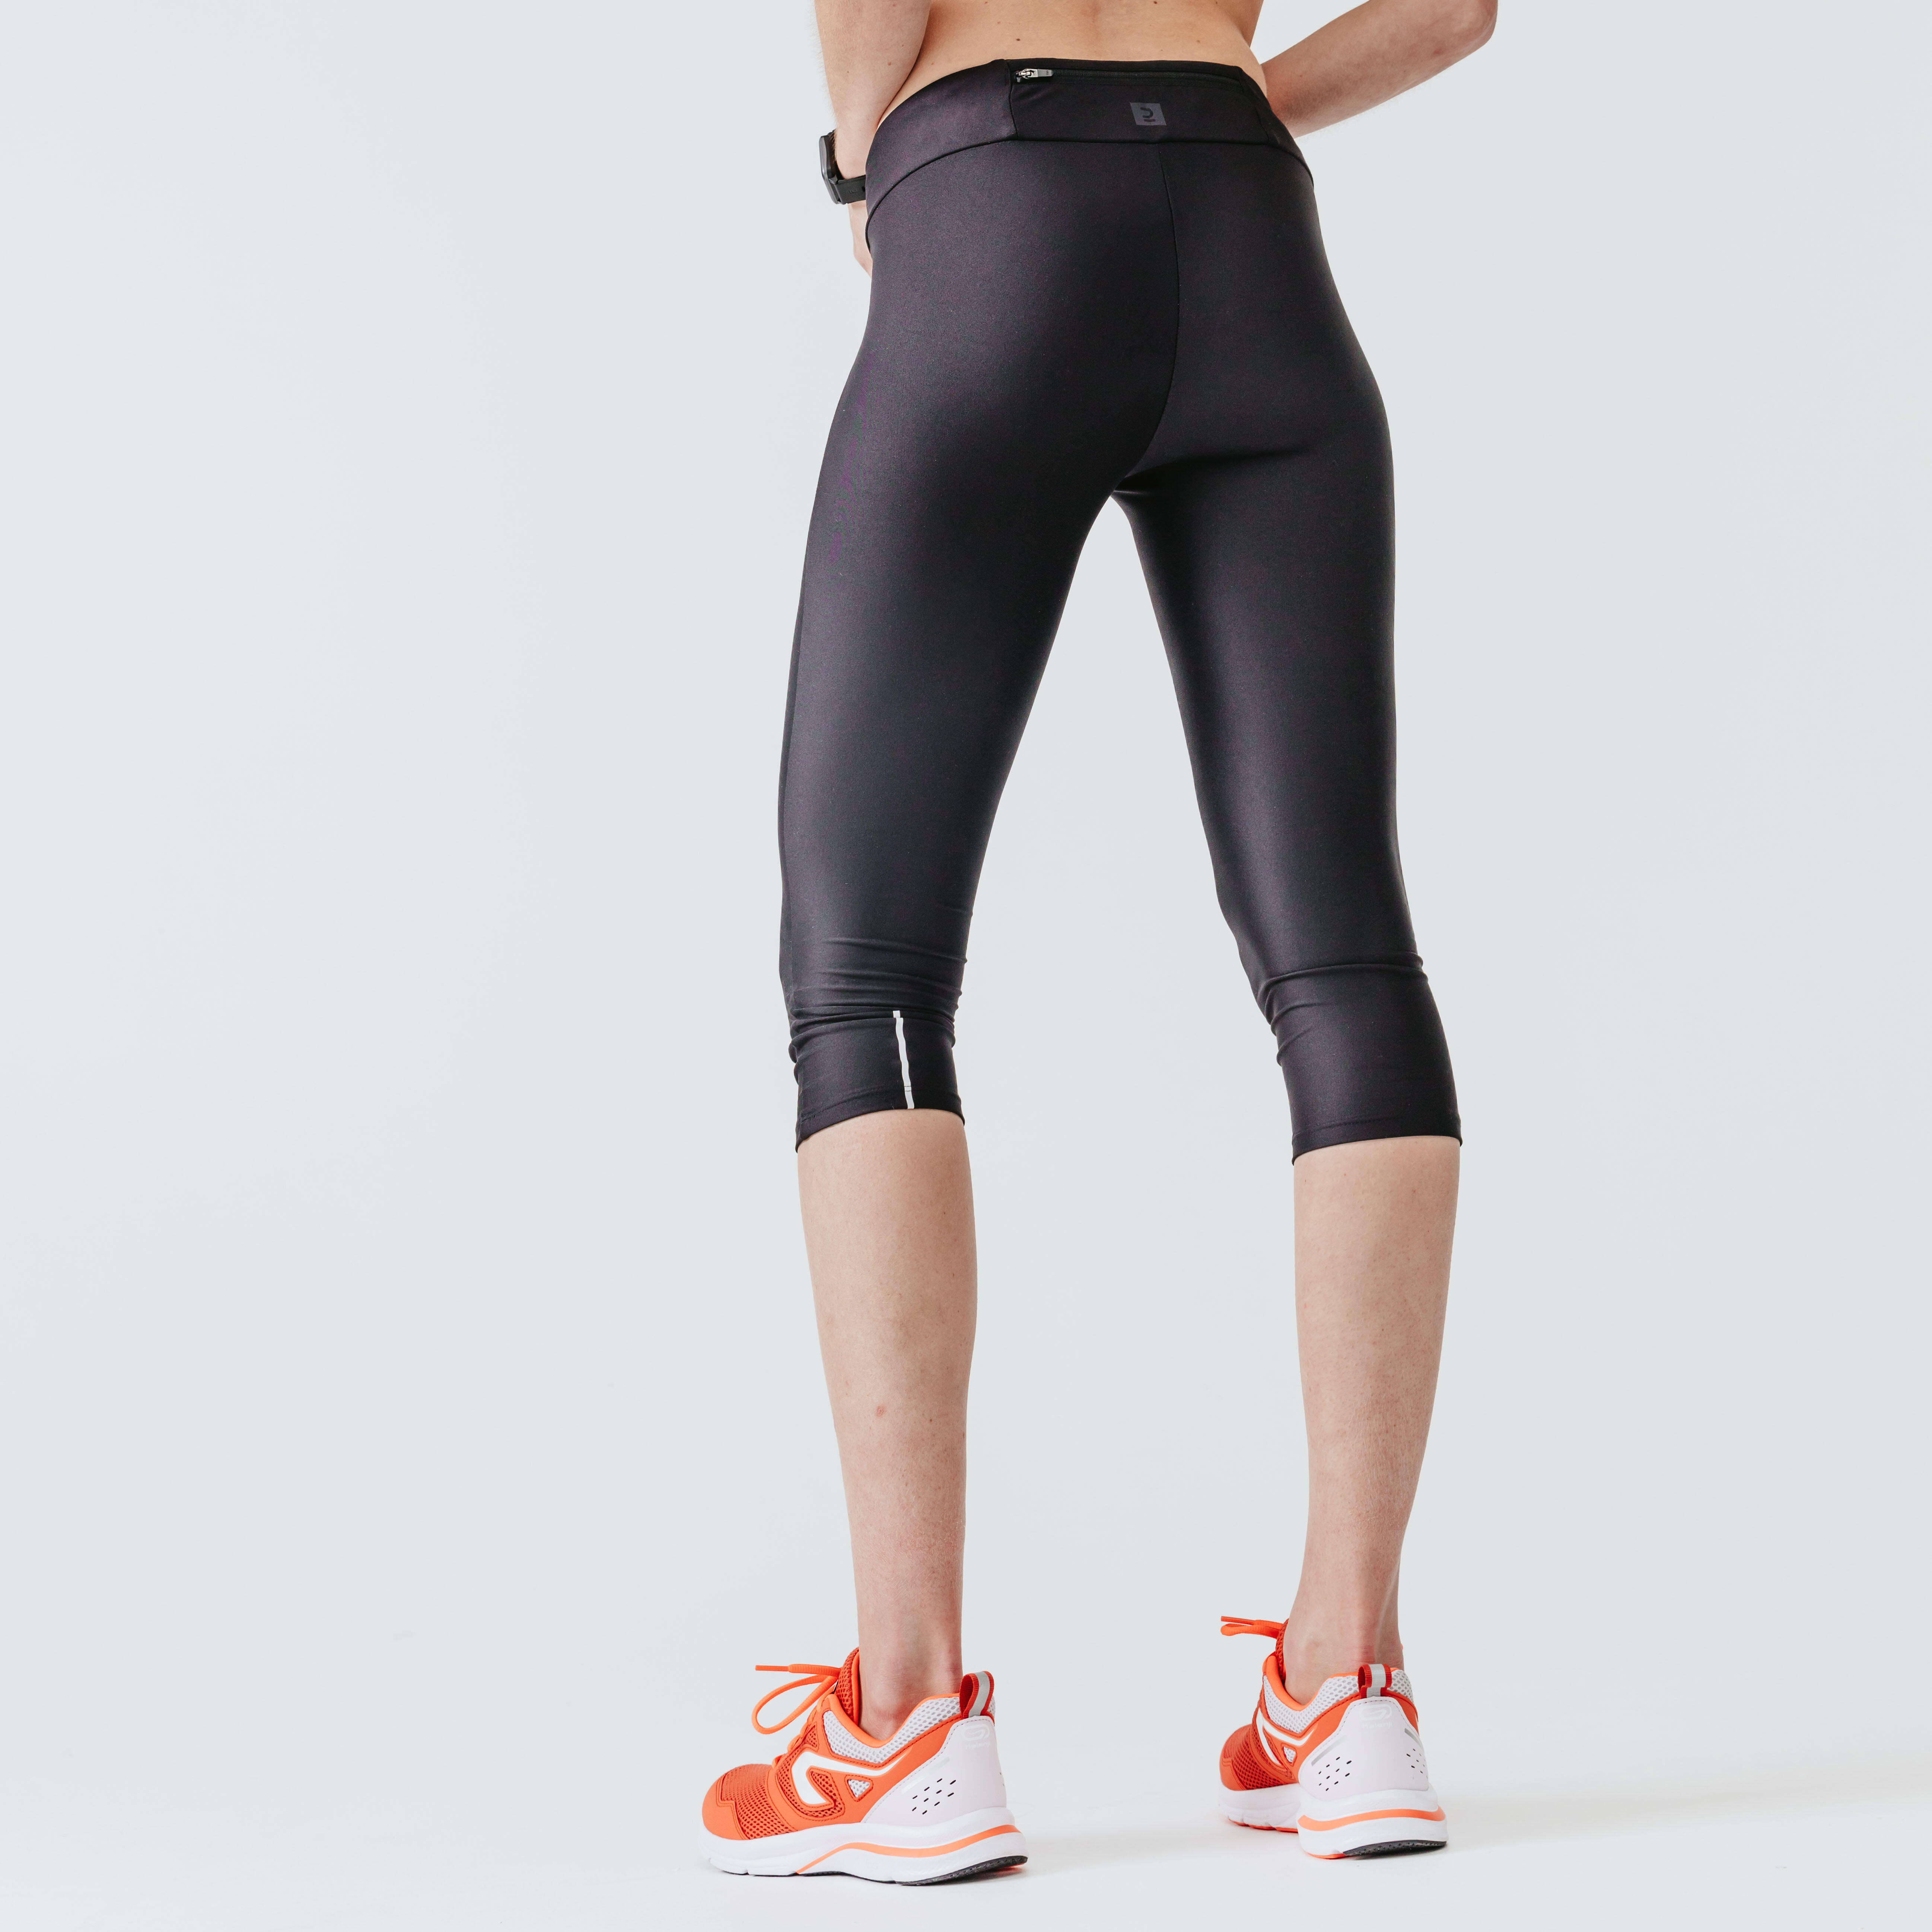 Black Fitness Track Women Running Leggings for Jogging Femme Sports Wear Reflective  Tights - China Jogging and Kit price